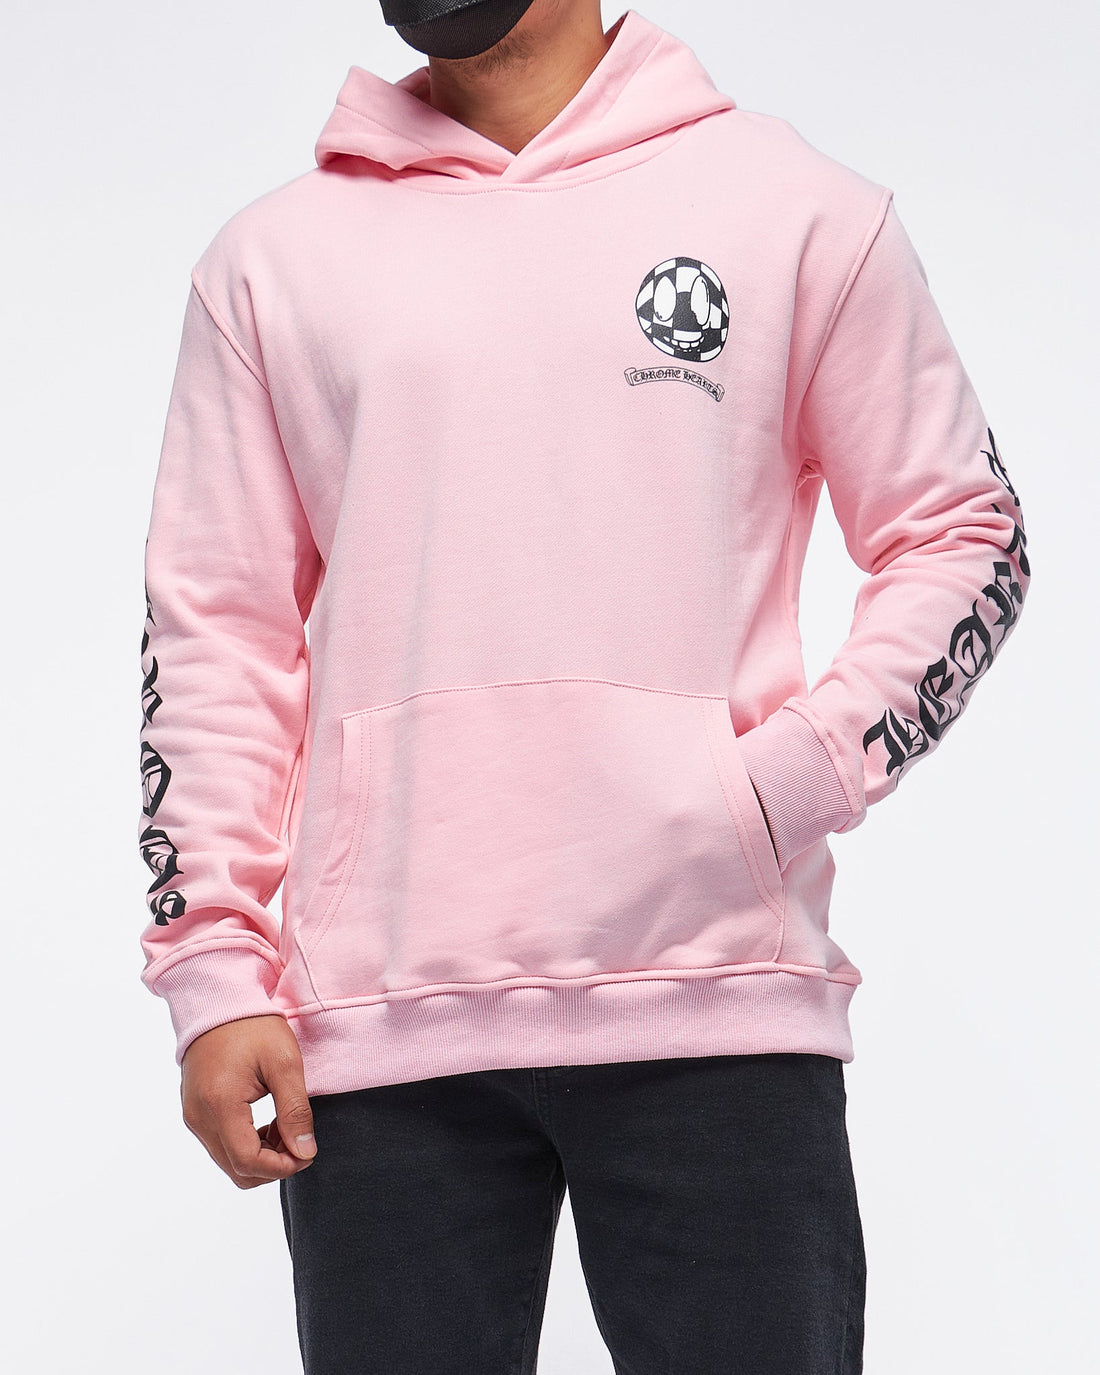 MOI OUTFIT-Back Logo Printed Men Hoodie 36.90